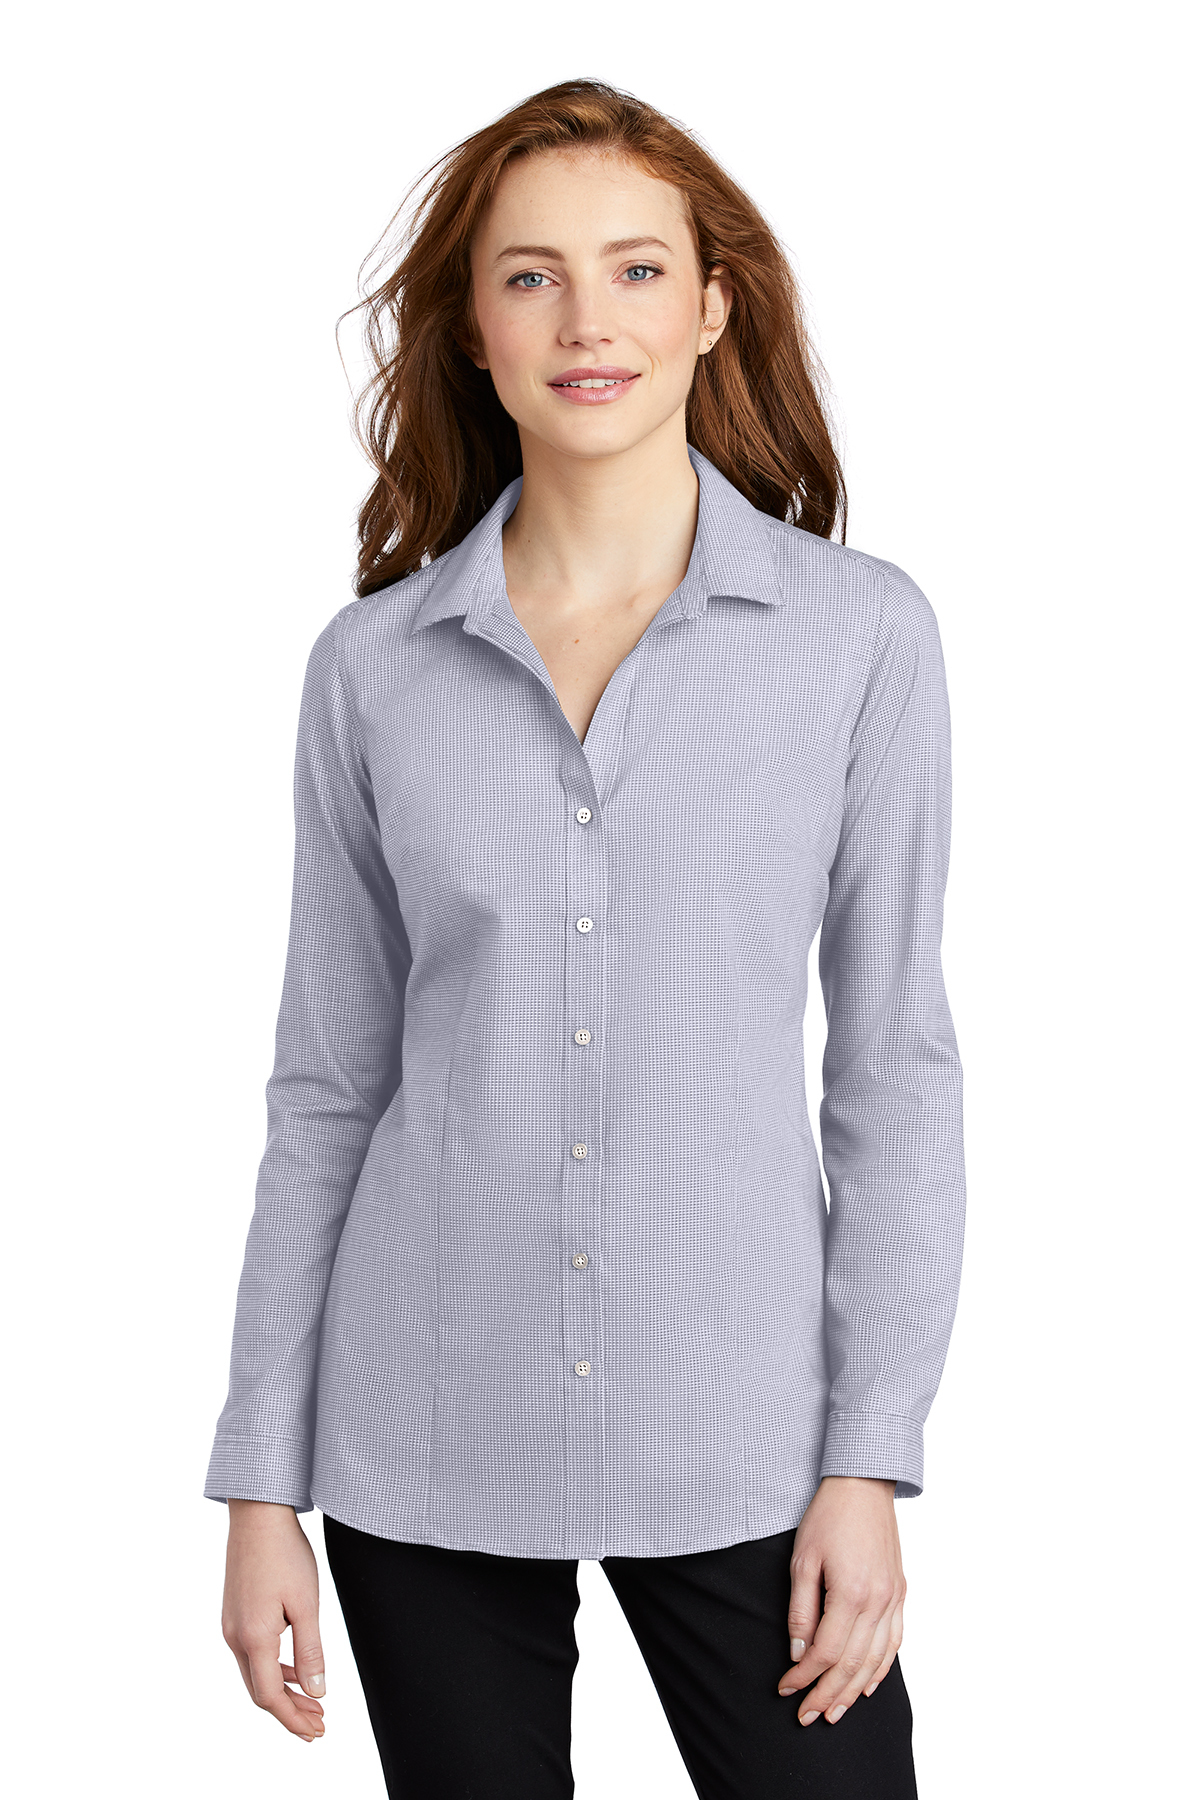 Port Authority Port Easy Product Authority Care Pincheck | Shirt | Ladies